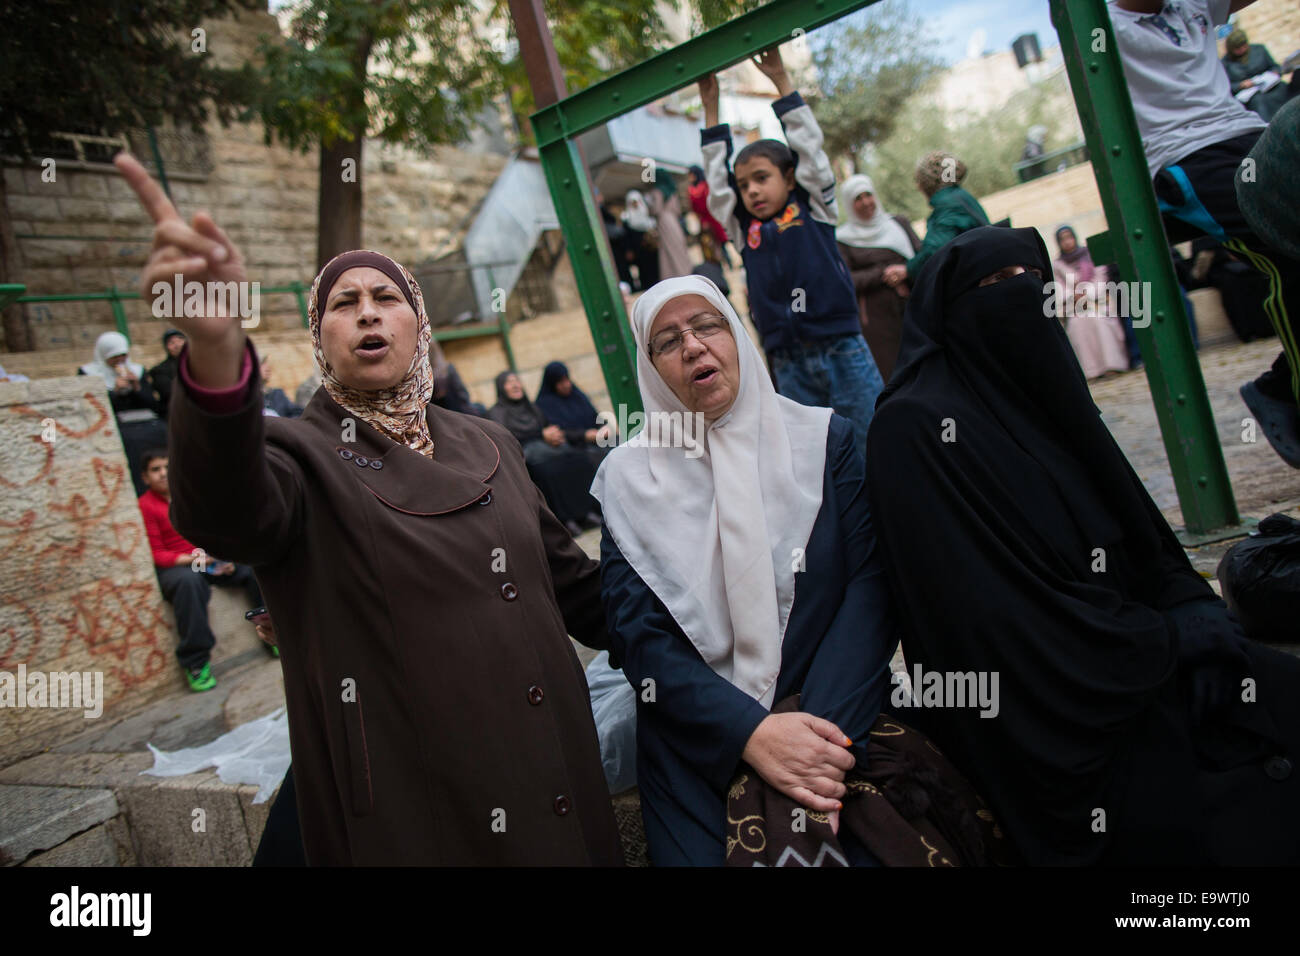 Jerusalem. 2nd Nov, 2014. Palestinian women argue with Israeli border police near a barrier leading to the Al-Aqsa Mosque near the lions gate in Jerusalem's Old City, on Nov. 2, 2014. Israeli Prime Minister Benjamin Netanyahu called on Sunday to the Israeli right-wing Knesset members to show restraint in regard to the Jewish presence in the Al-Aqsa Mosque or the Temple Mount compound. © JINI/Xinhua/Alamy Live News Stock Photo